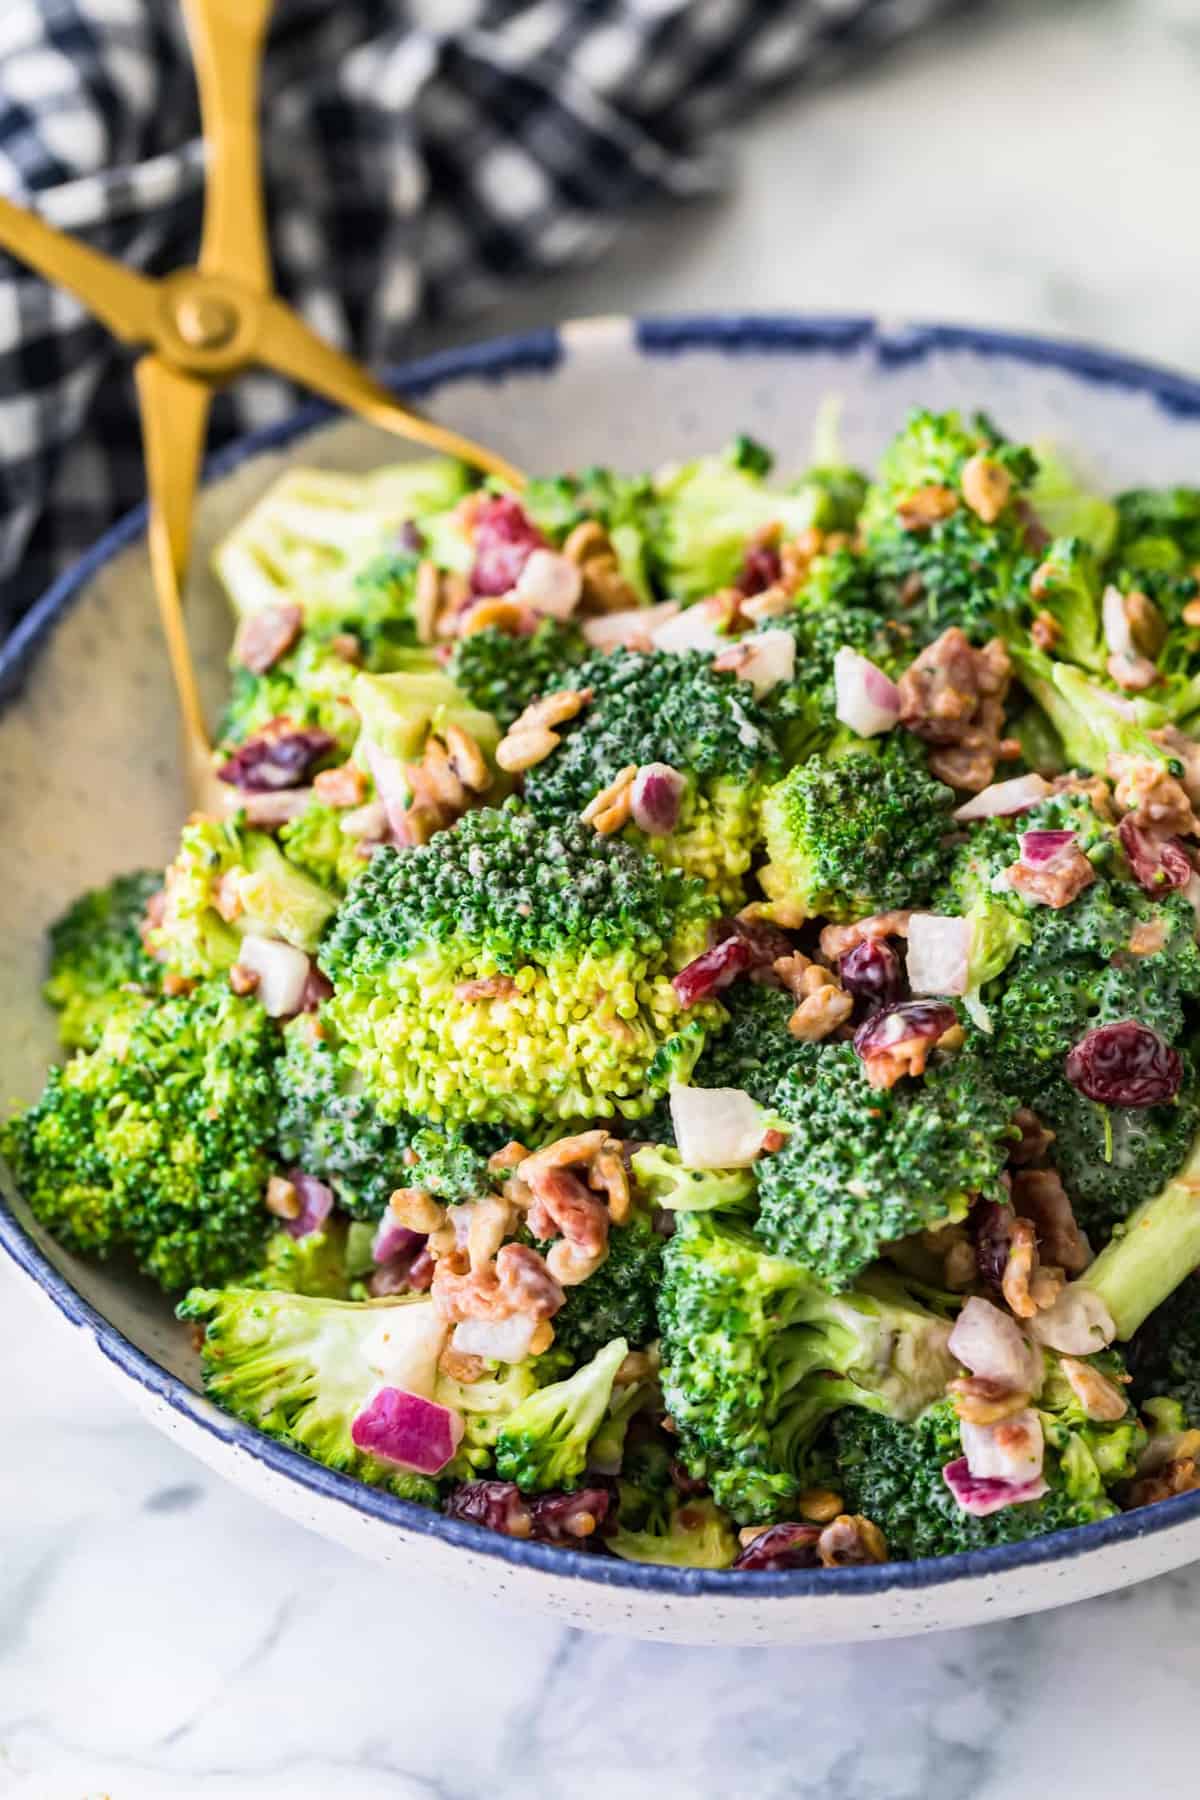 Close up of Broccoli salad in a blue and white bowl